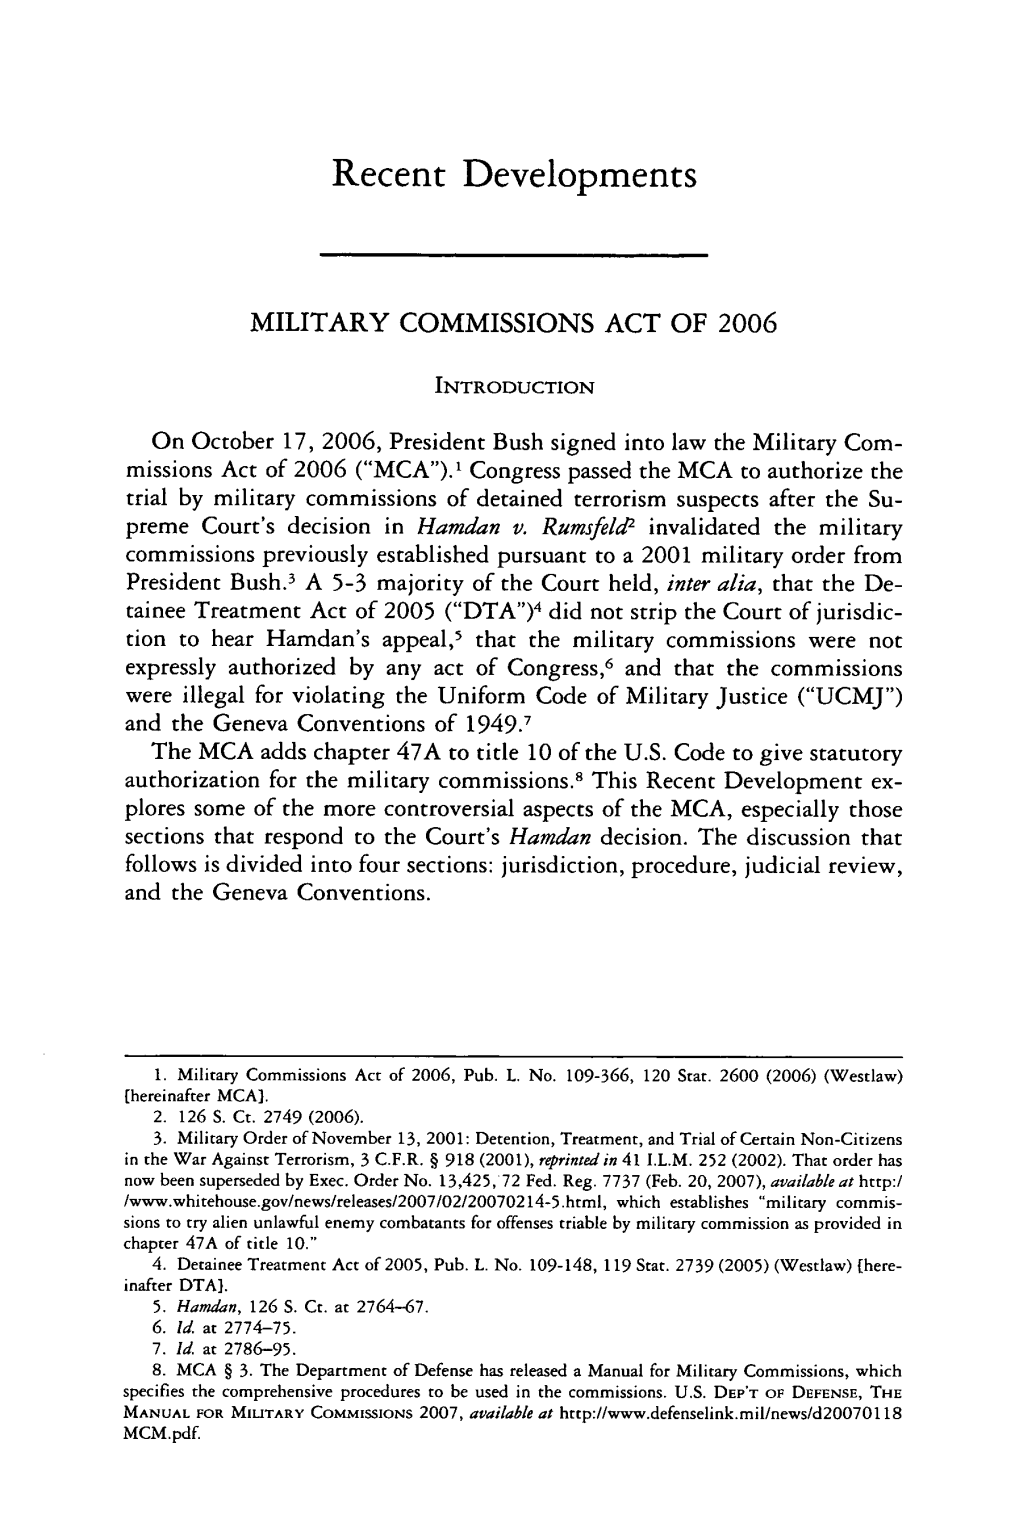 Military Commissions Act of 2006